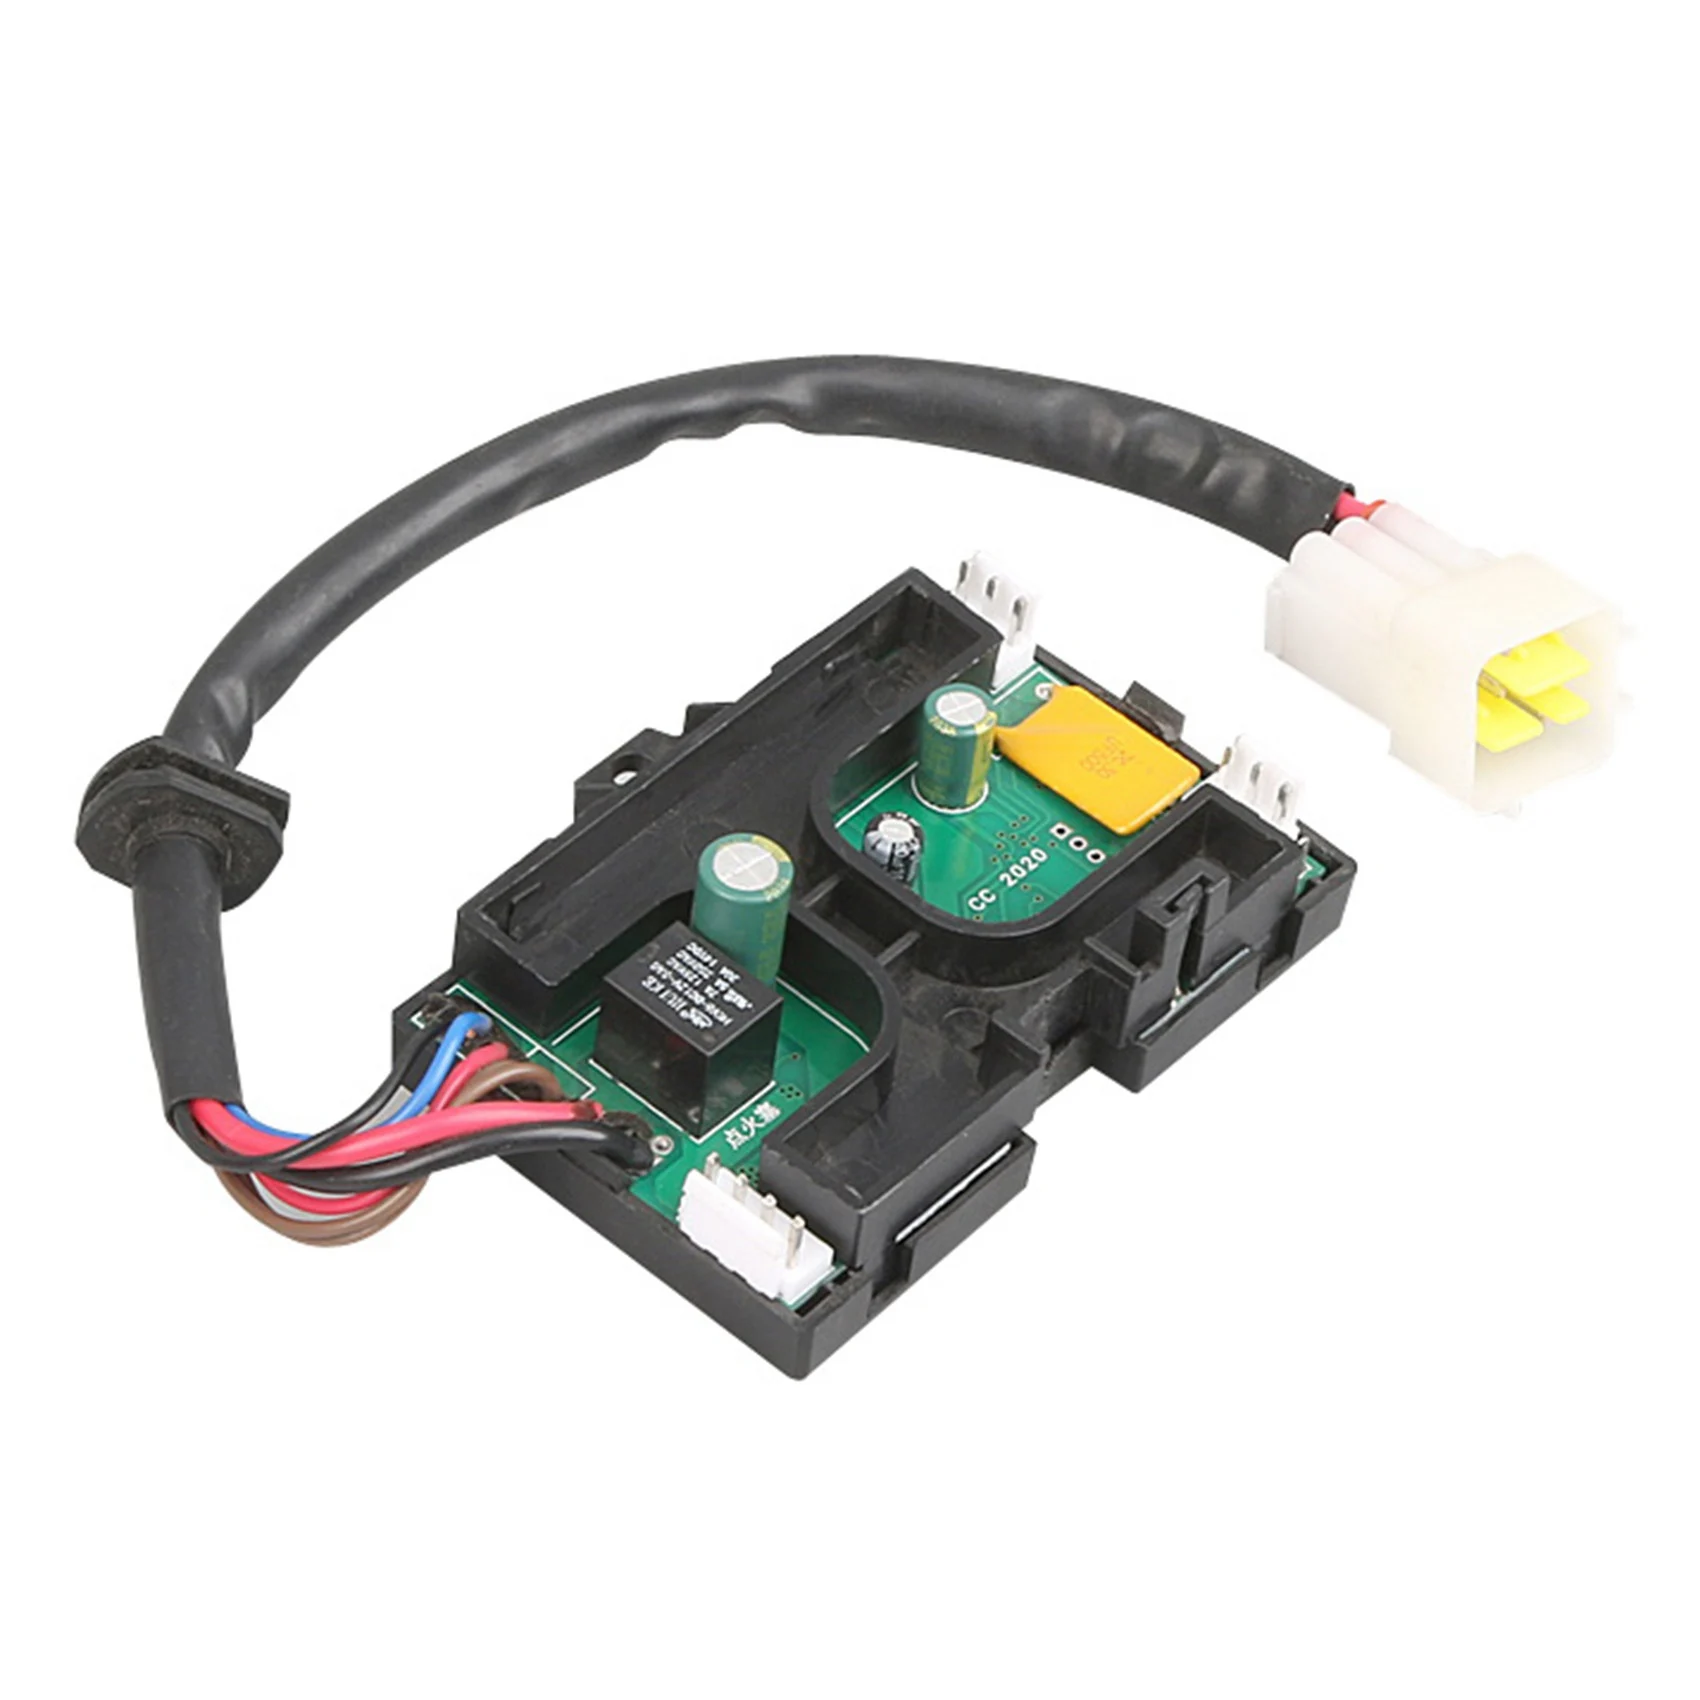 

12V 5KW Circuit Board Main Motherboard Controller for Air Parking Heater Air Diesels Heater Car Motherboard Controller